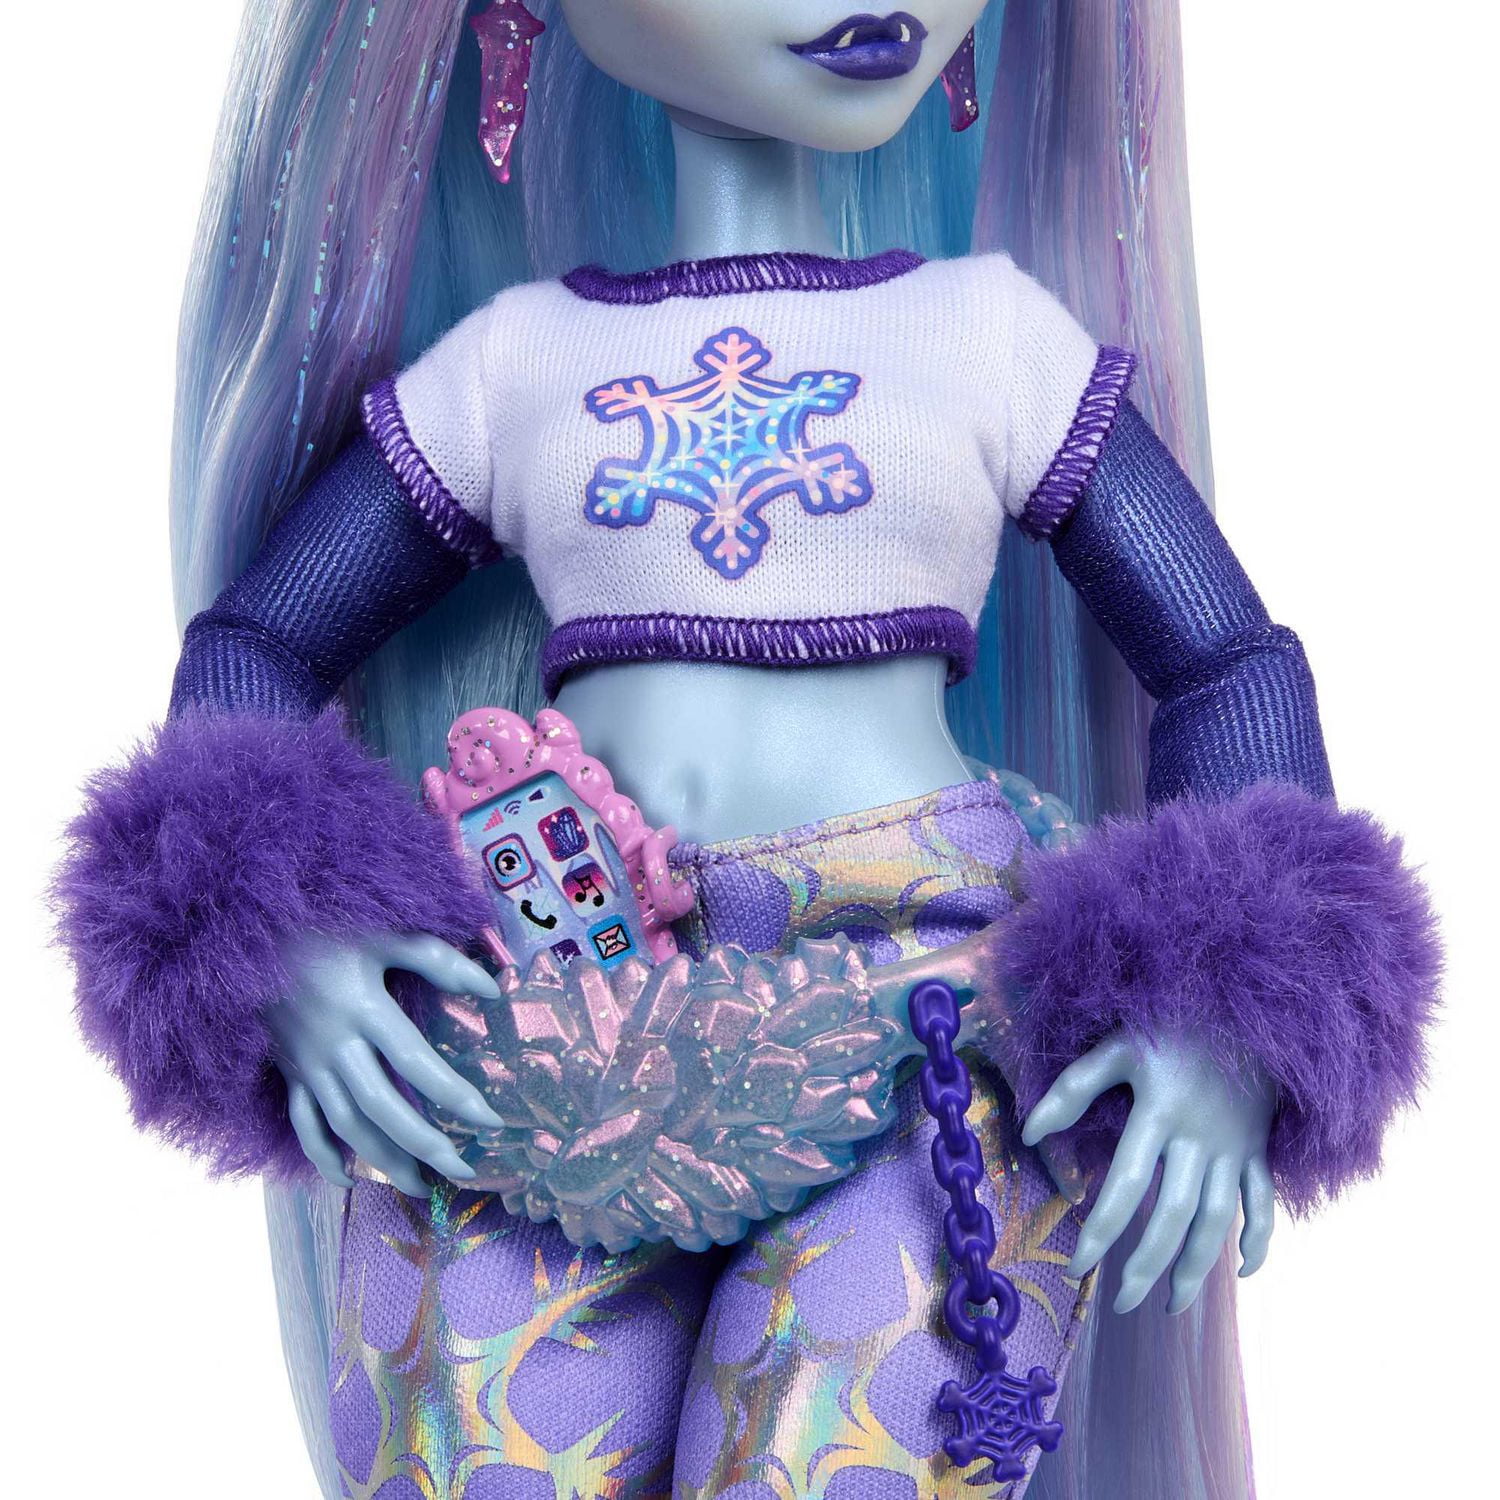 Monster High - Spectra Vondergeist - Picture Day - Purple Leggings Pants  Only